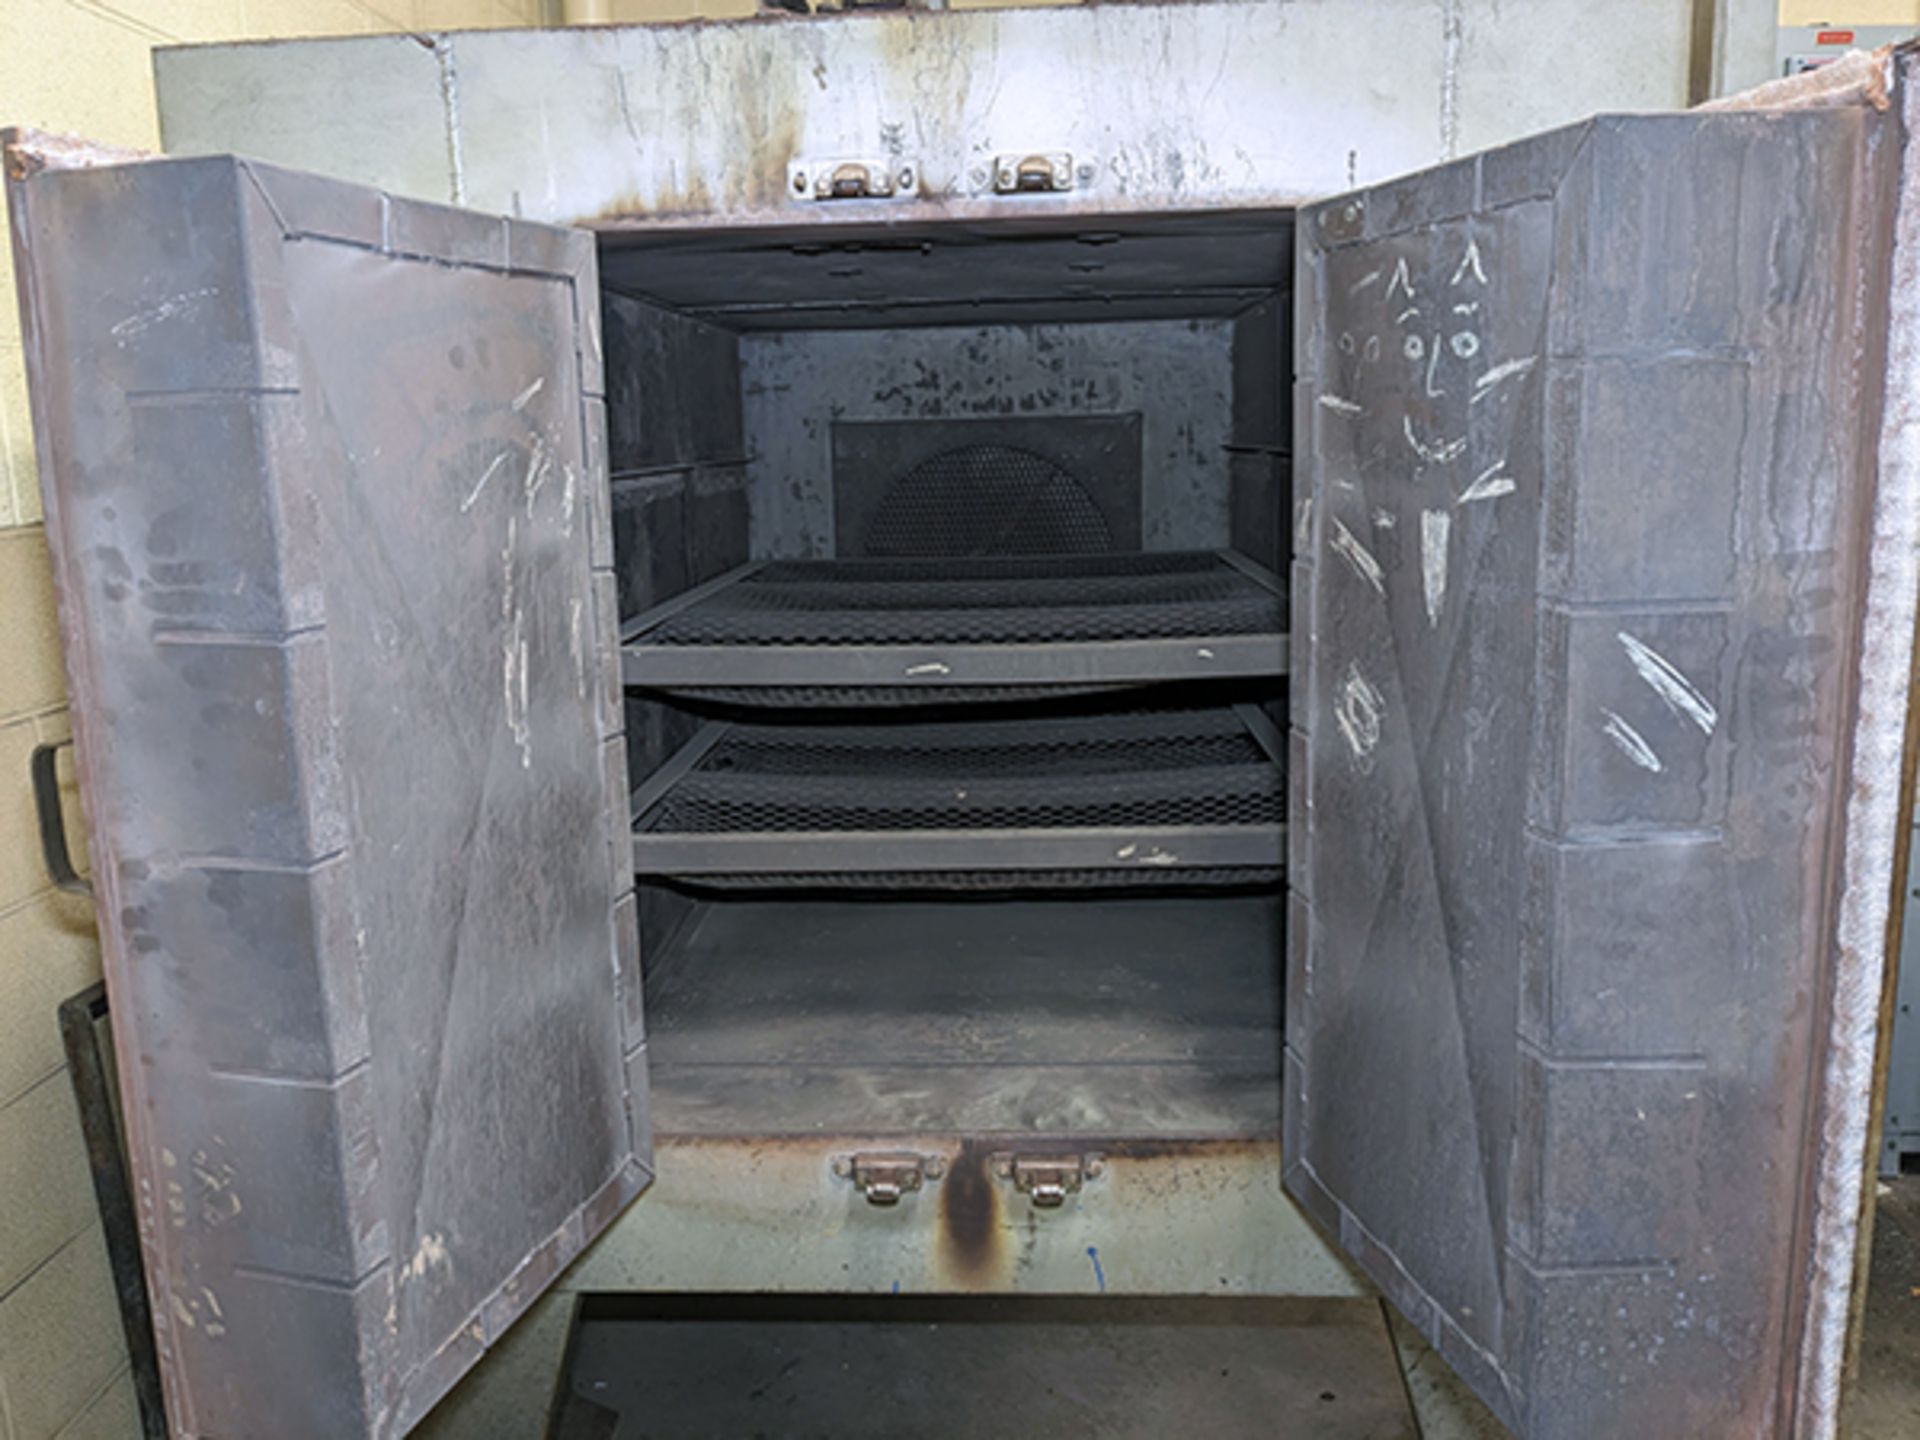 Trent Inc No. 897-166 Electric Furnace - Image 6 of 7